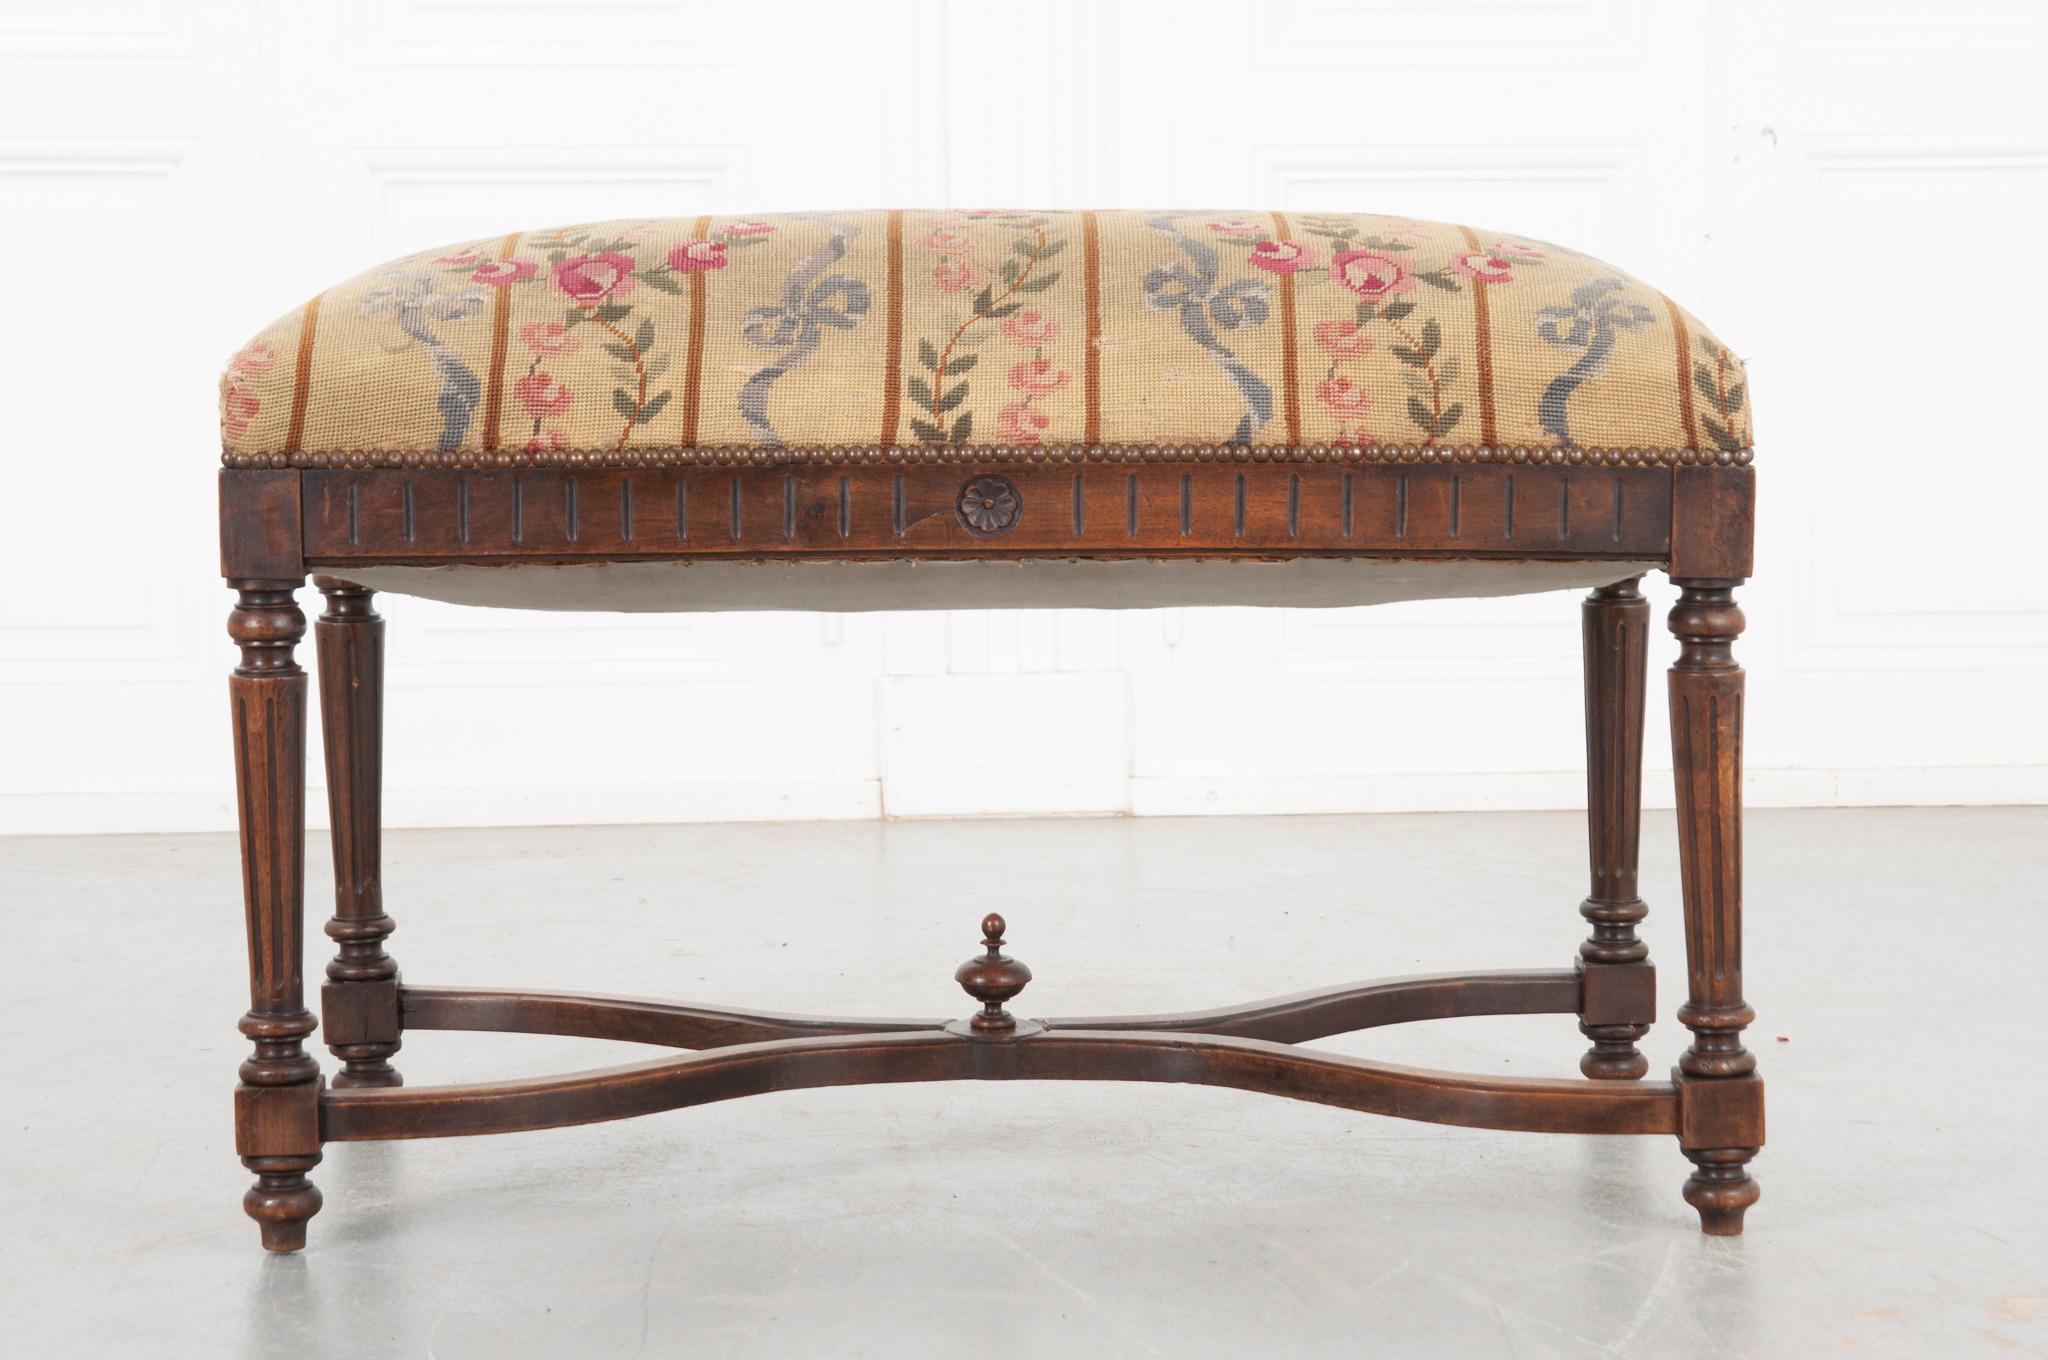 Louis XVI French Carved Walnut Bench with Needlepoint Upholstery